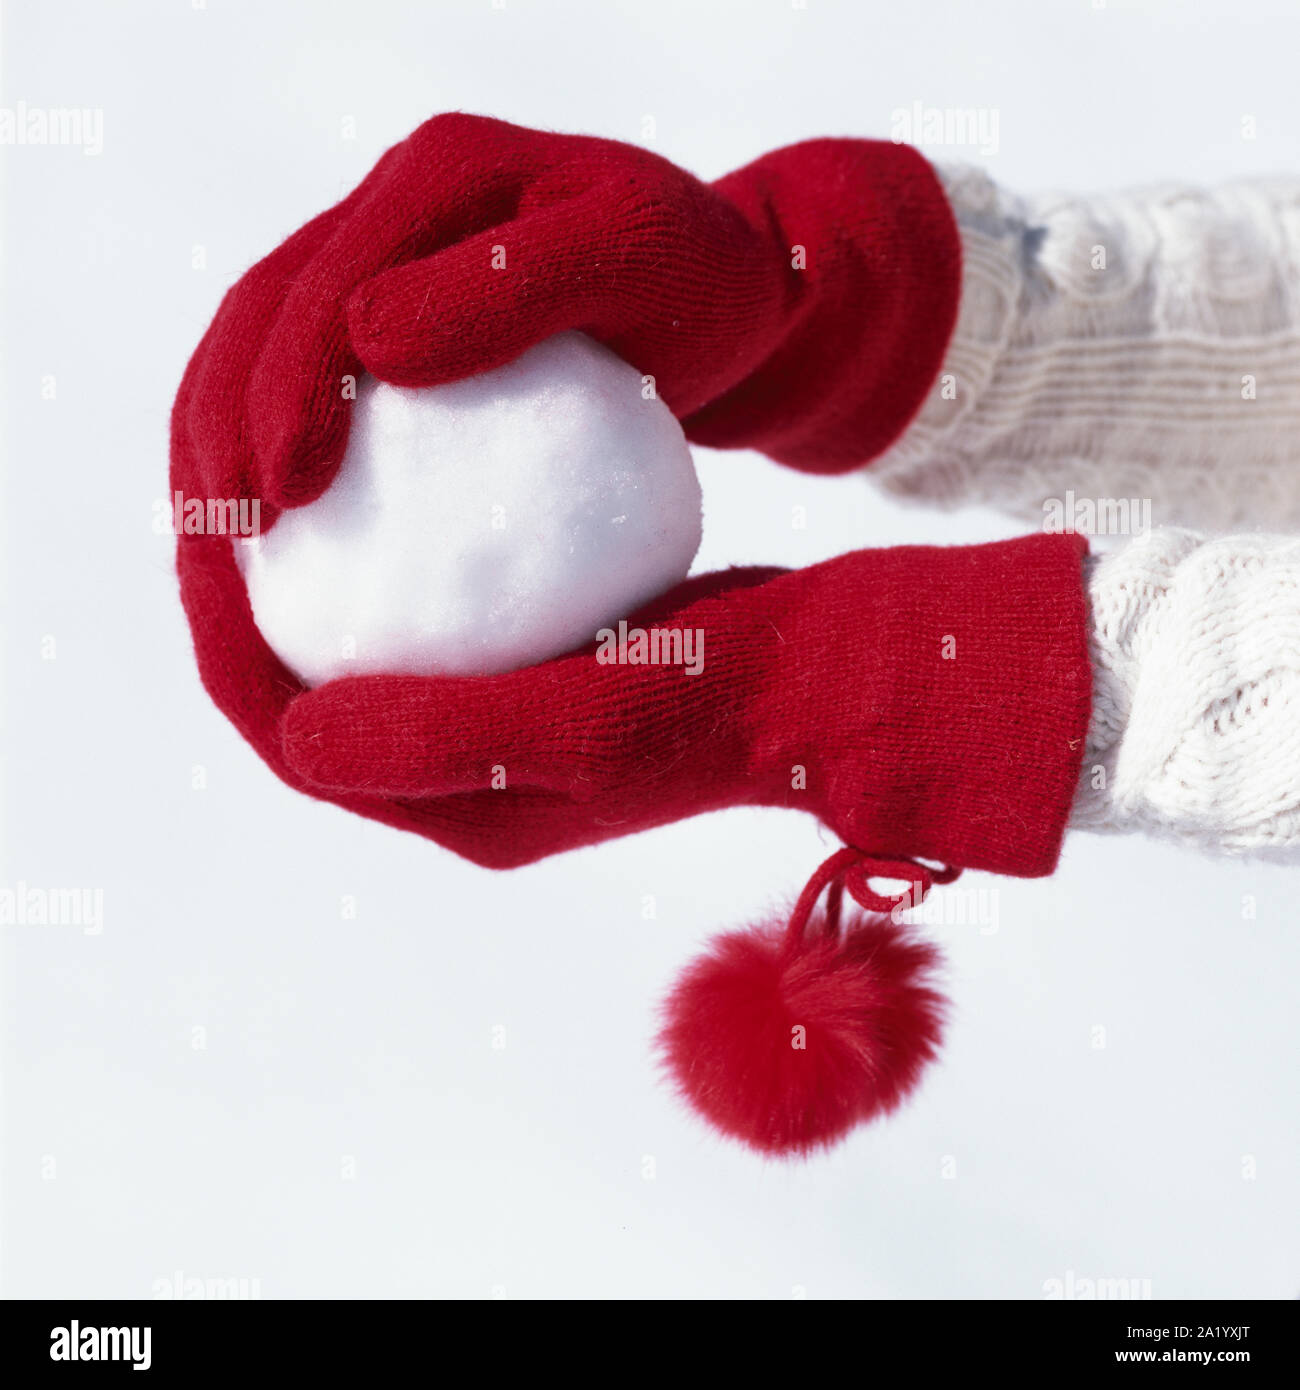 Woman's hands with red knit gloves holding snowball. People having fun in the snow outdoors in winter. Women's cold weather fashion accessories. Stock Photo